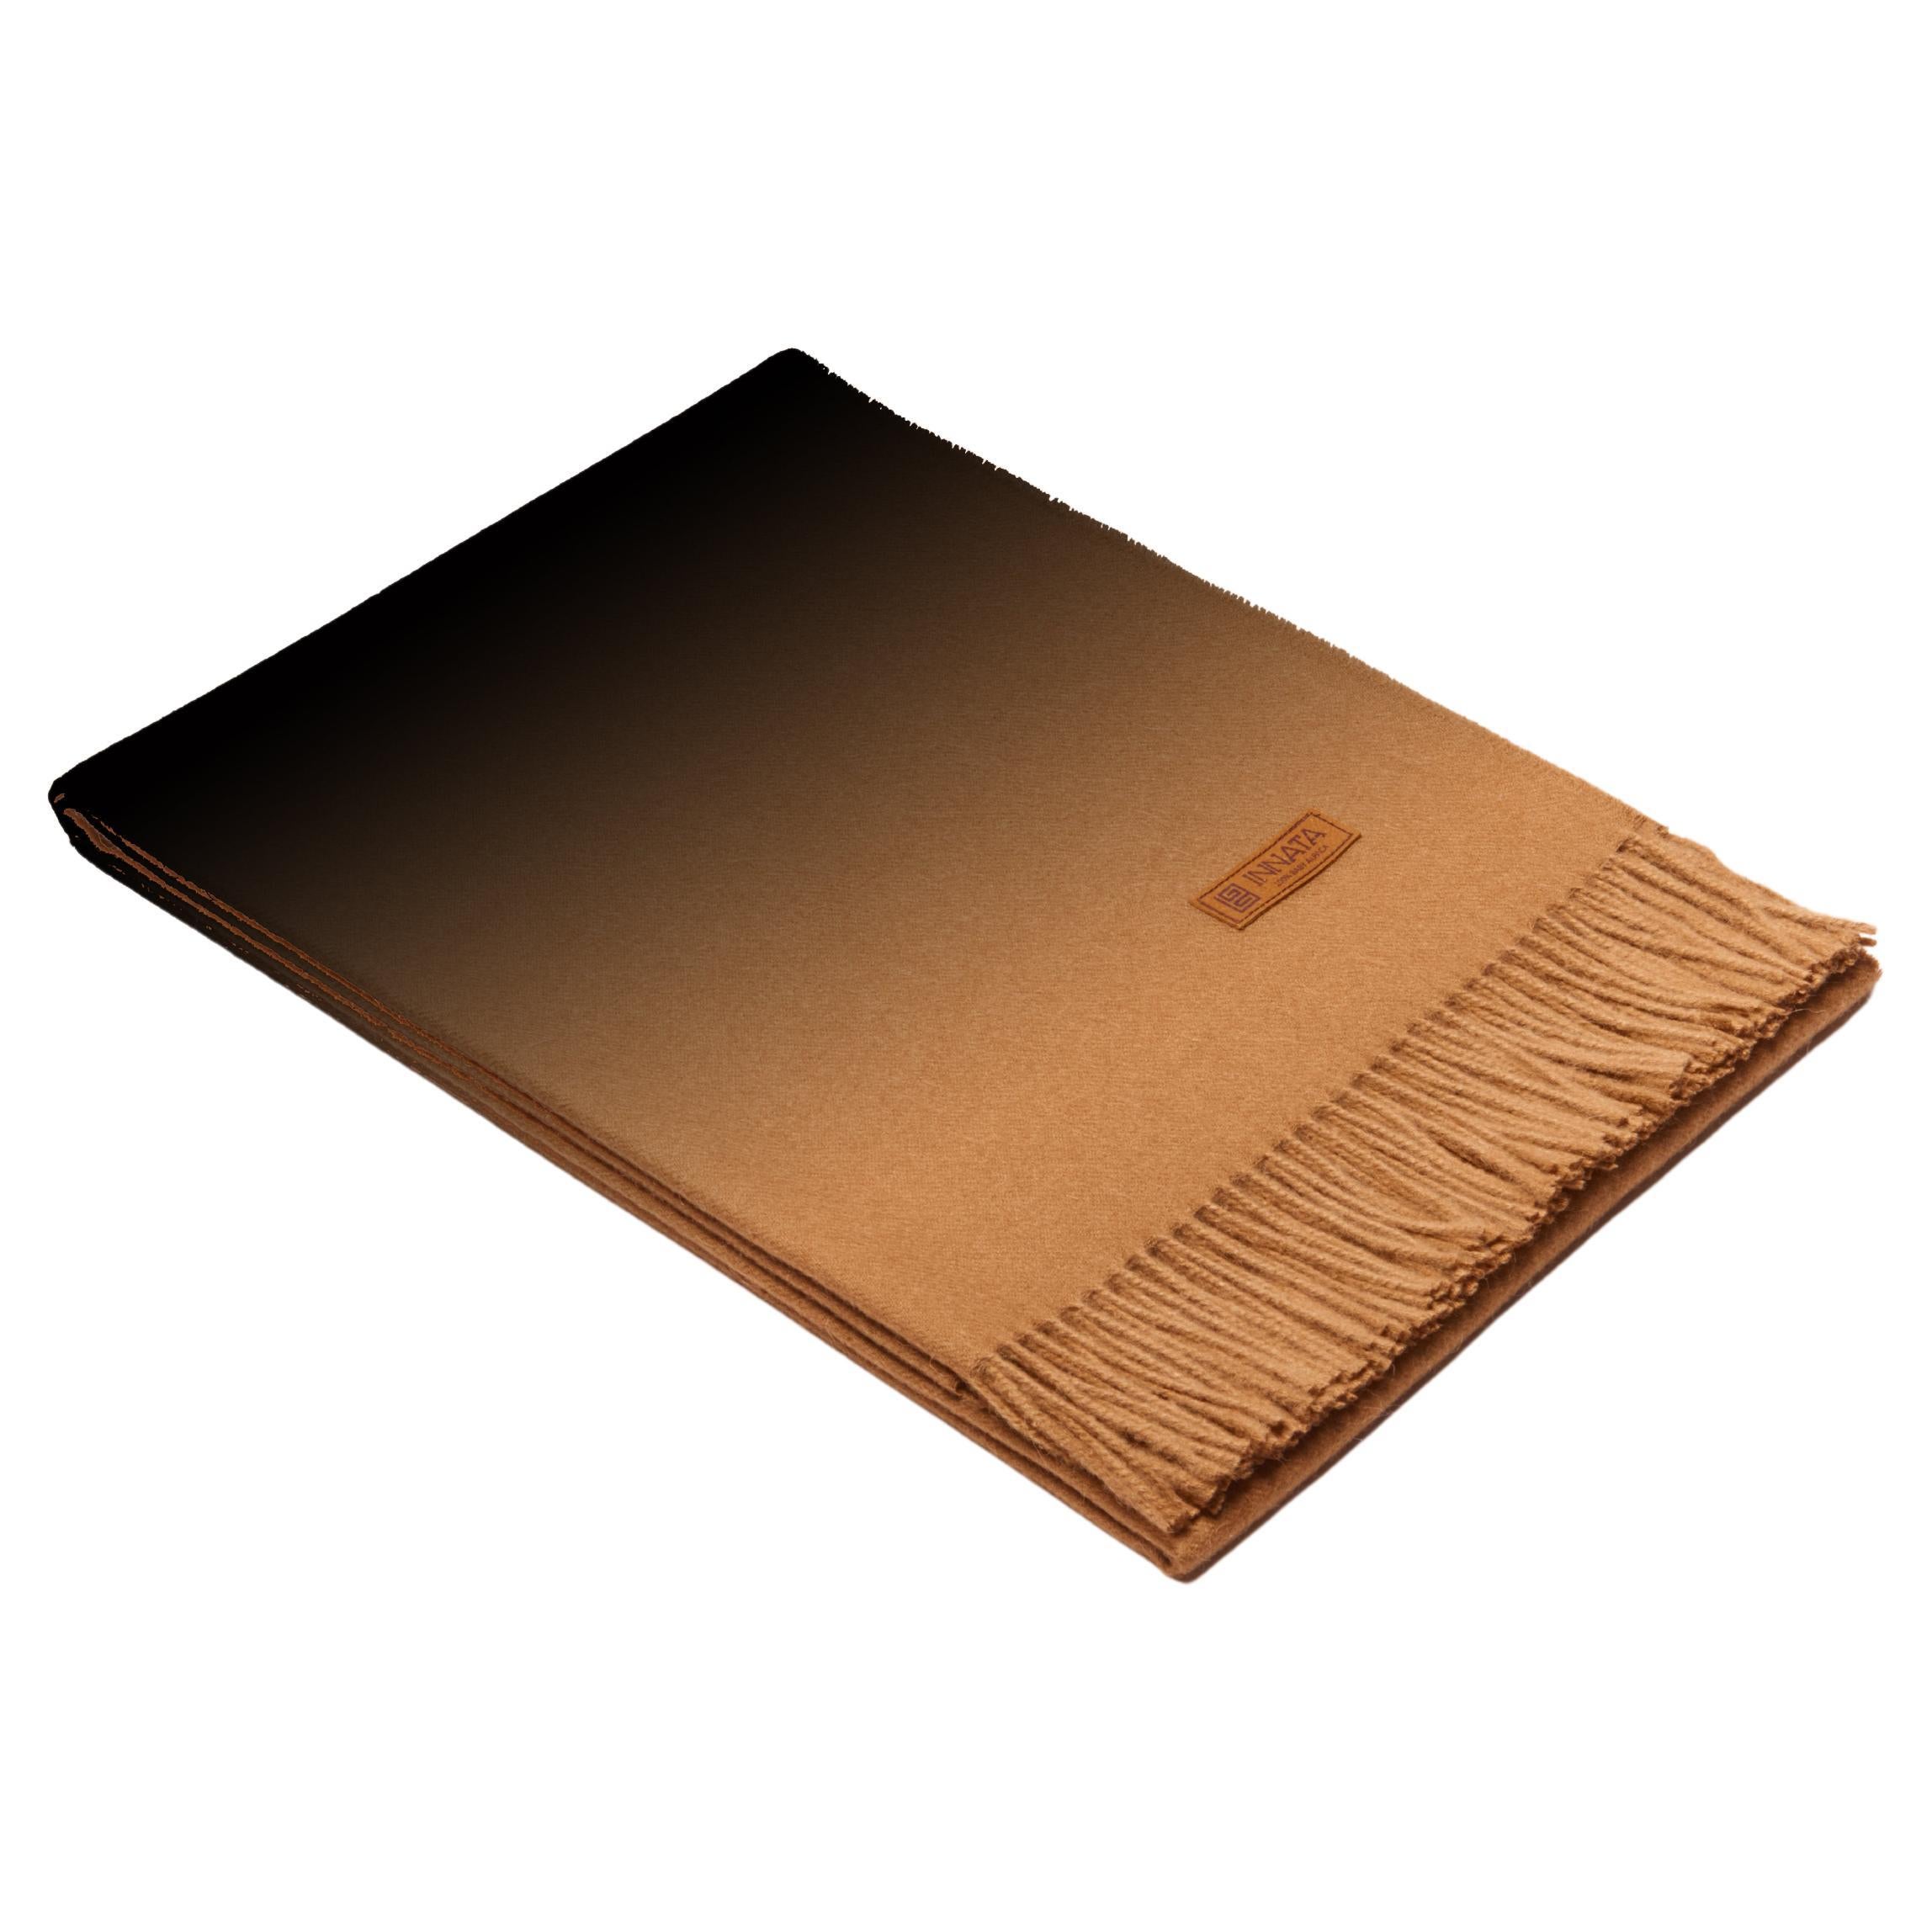 Hand-Dyed Peruvian Luxury Baby Alpaca Wool Throw in Camel with Black Tint For Sale